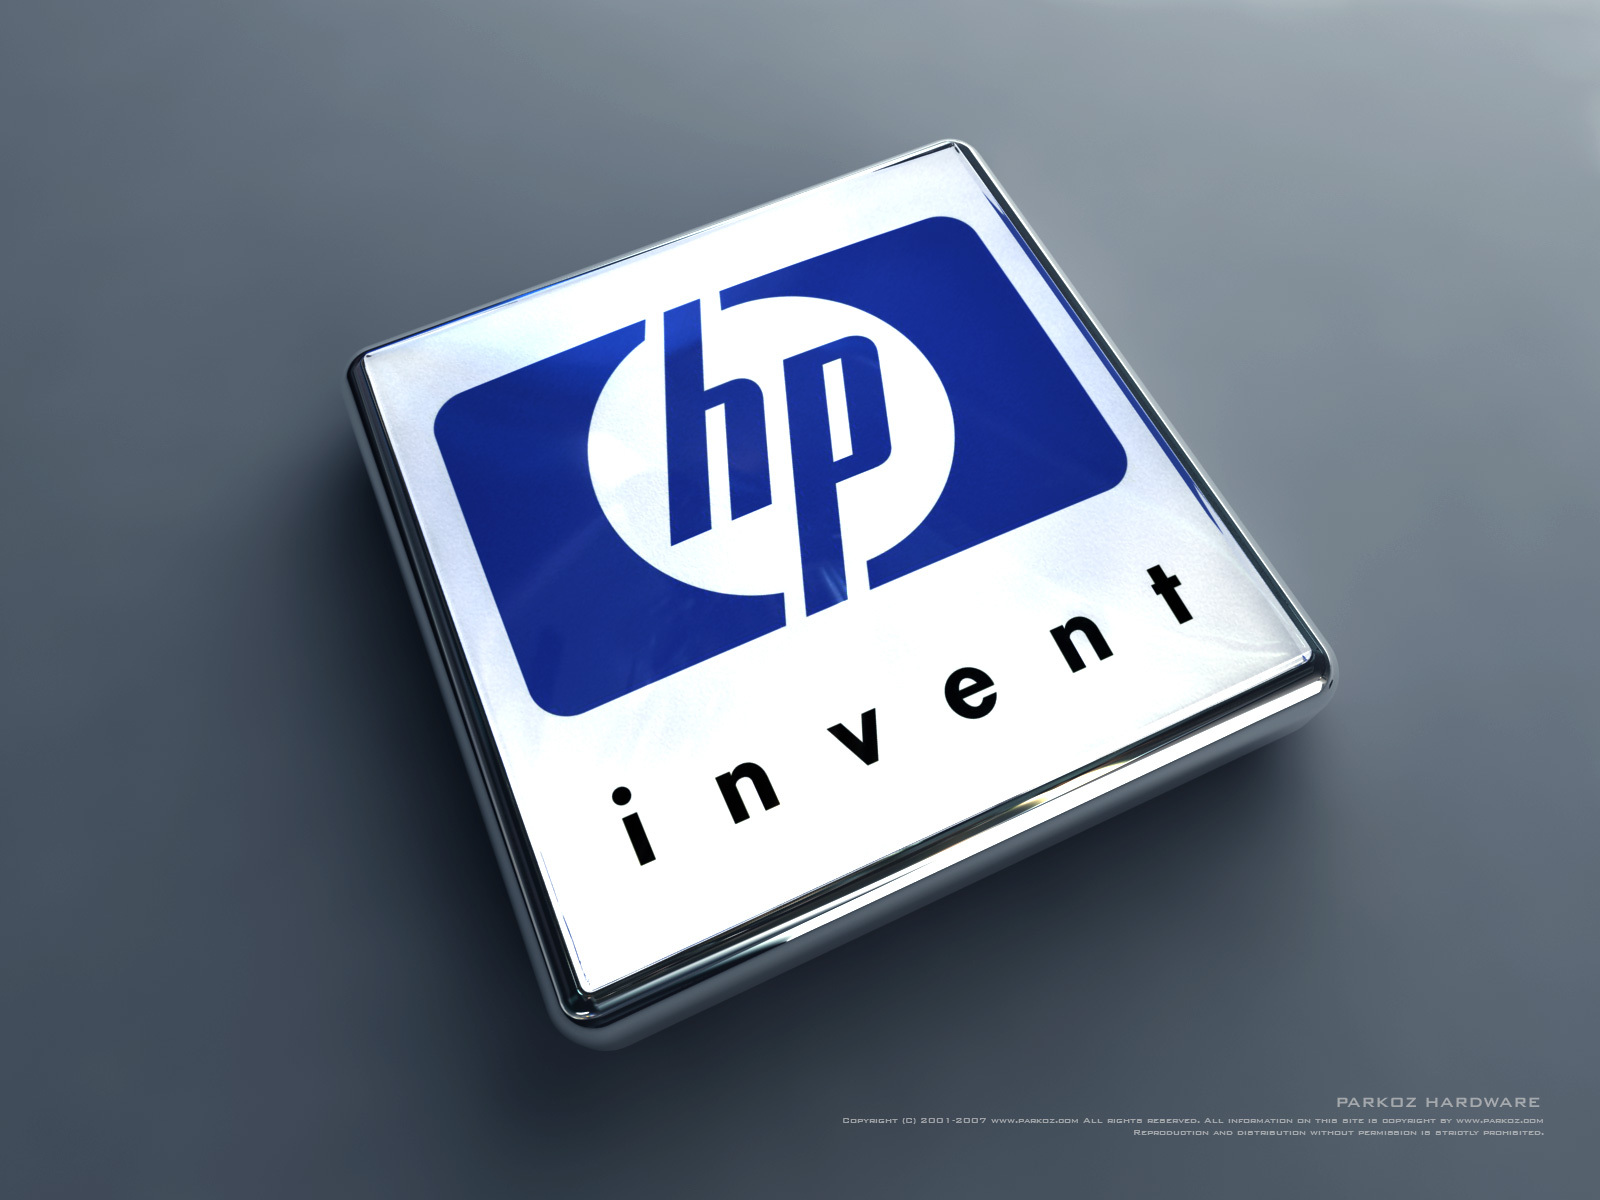 Chip HP computer wallpapers and images